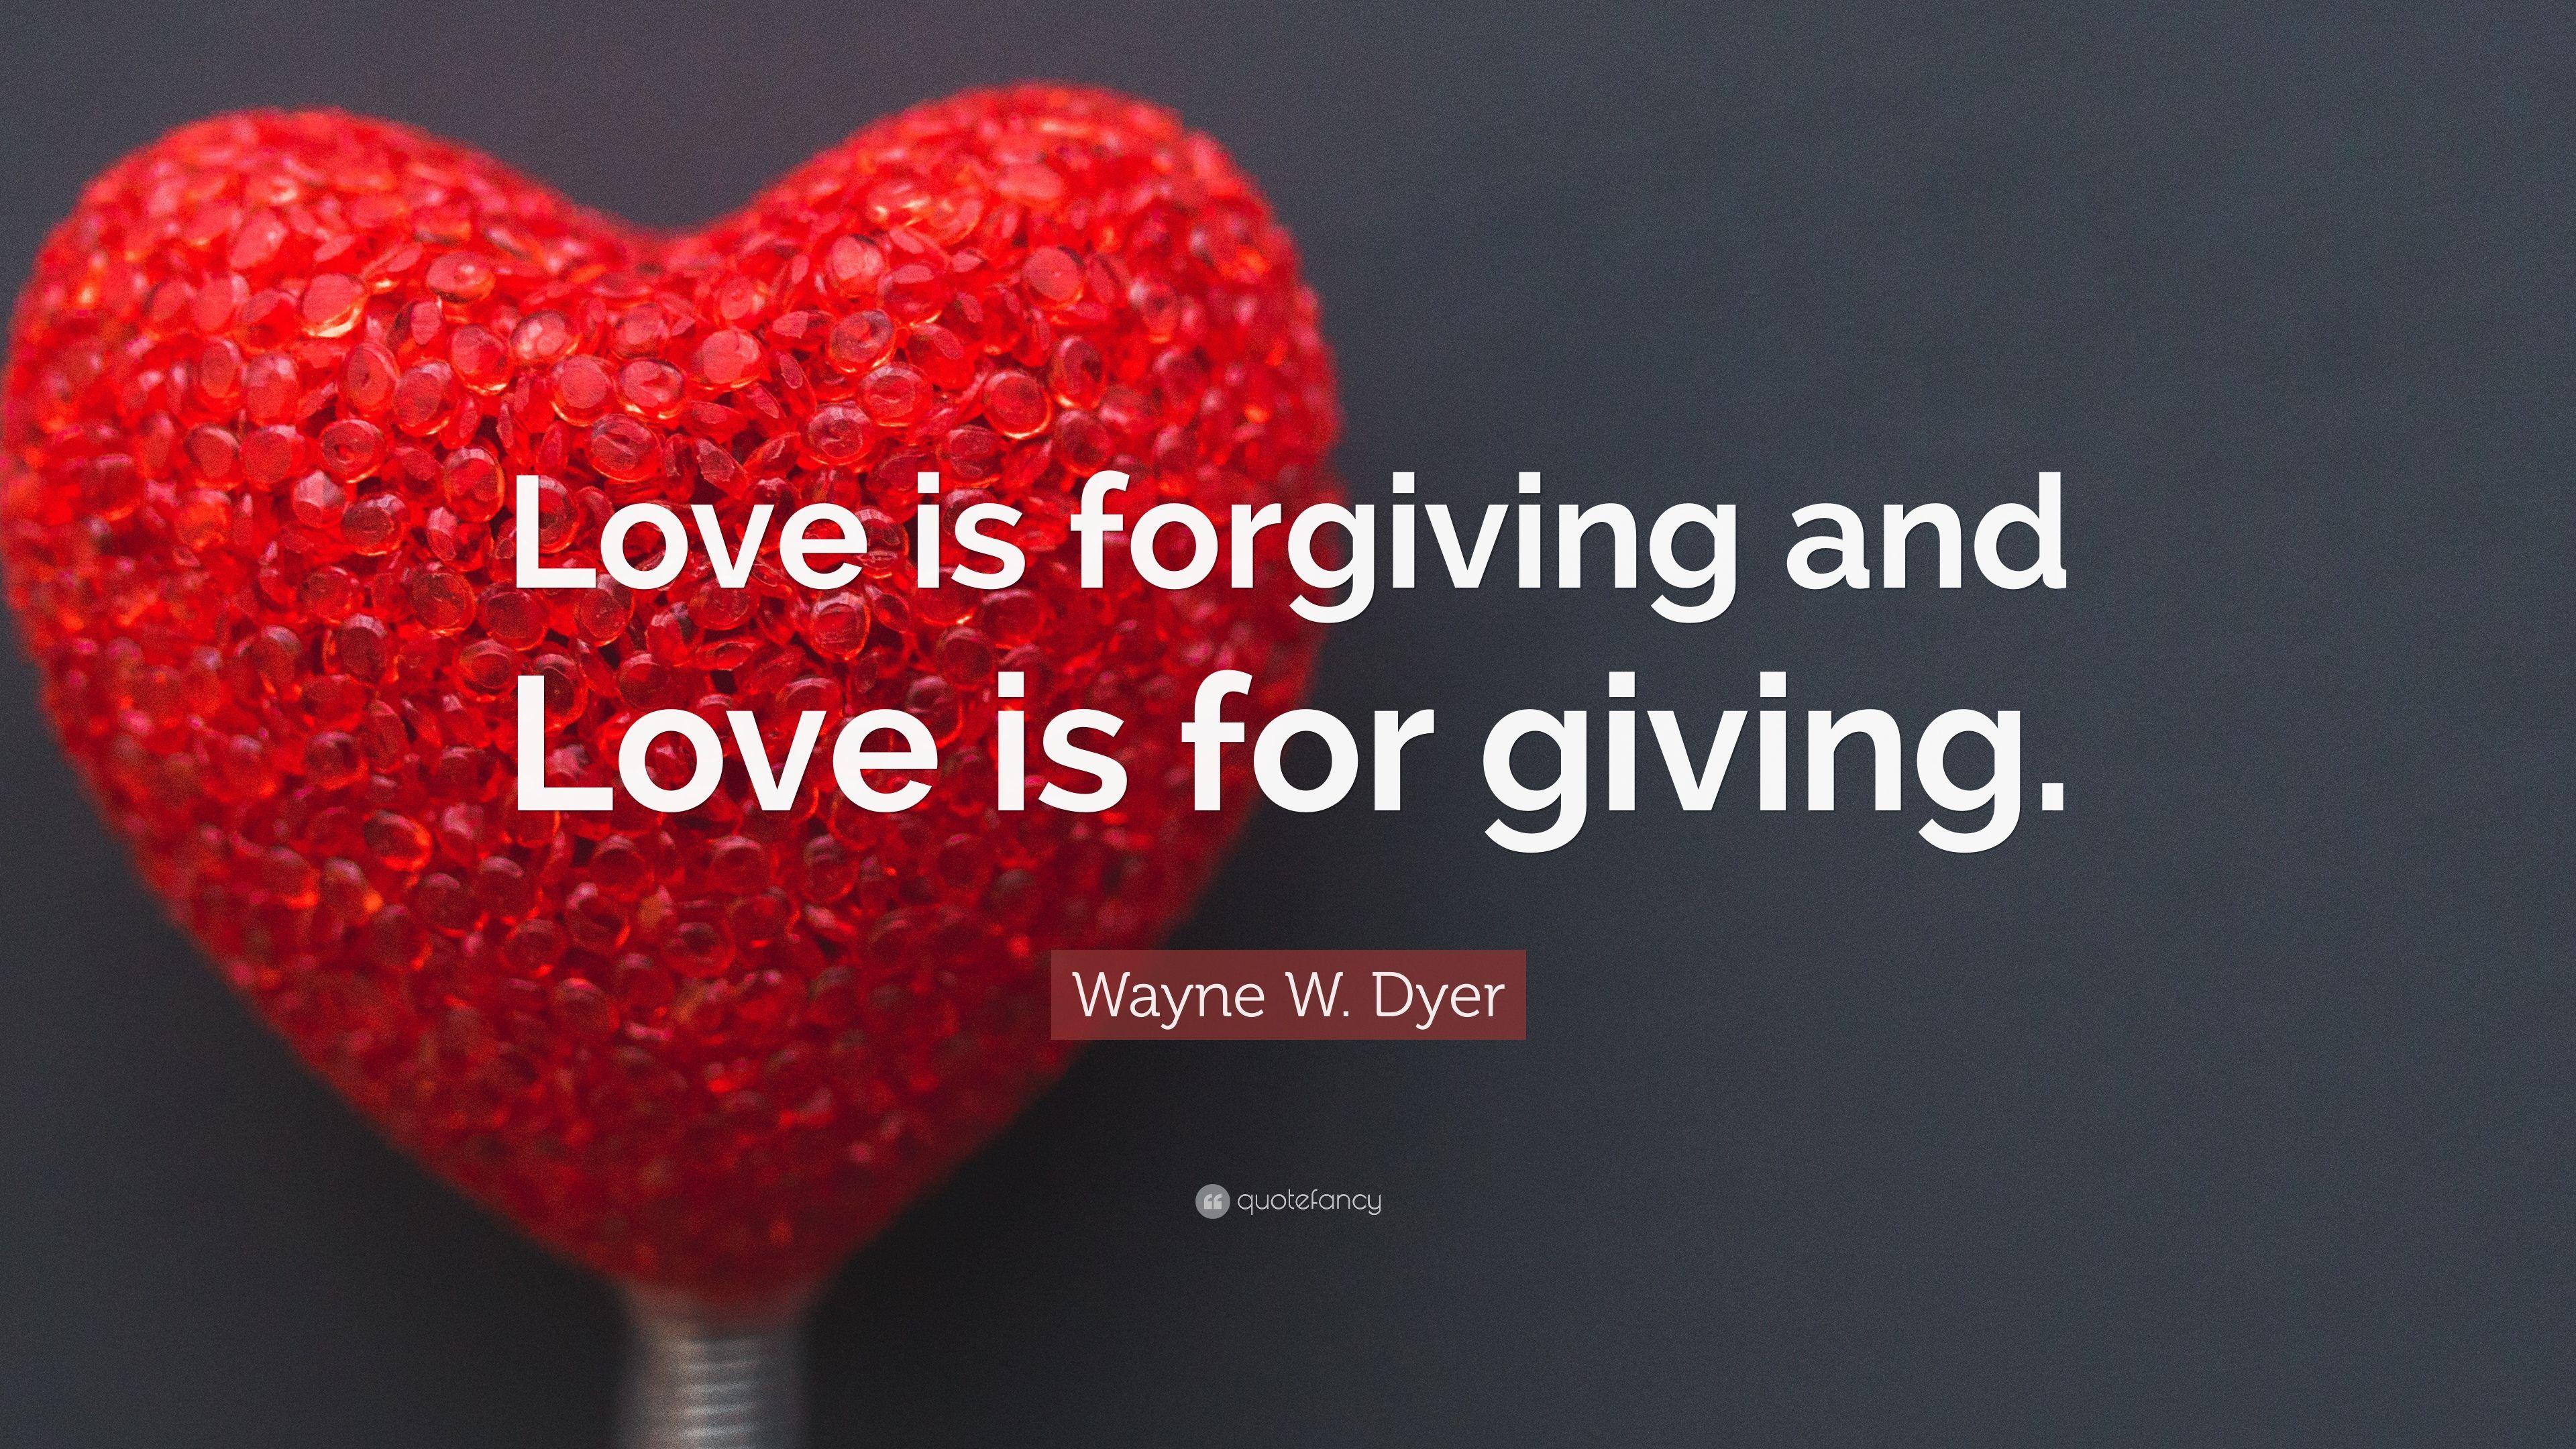 Wayne W. Dyer Quote: “Love is forgiving and Love is for giving